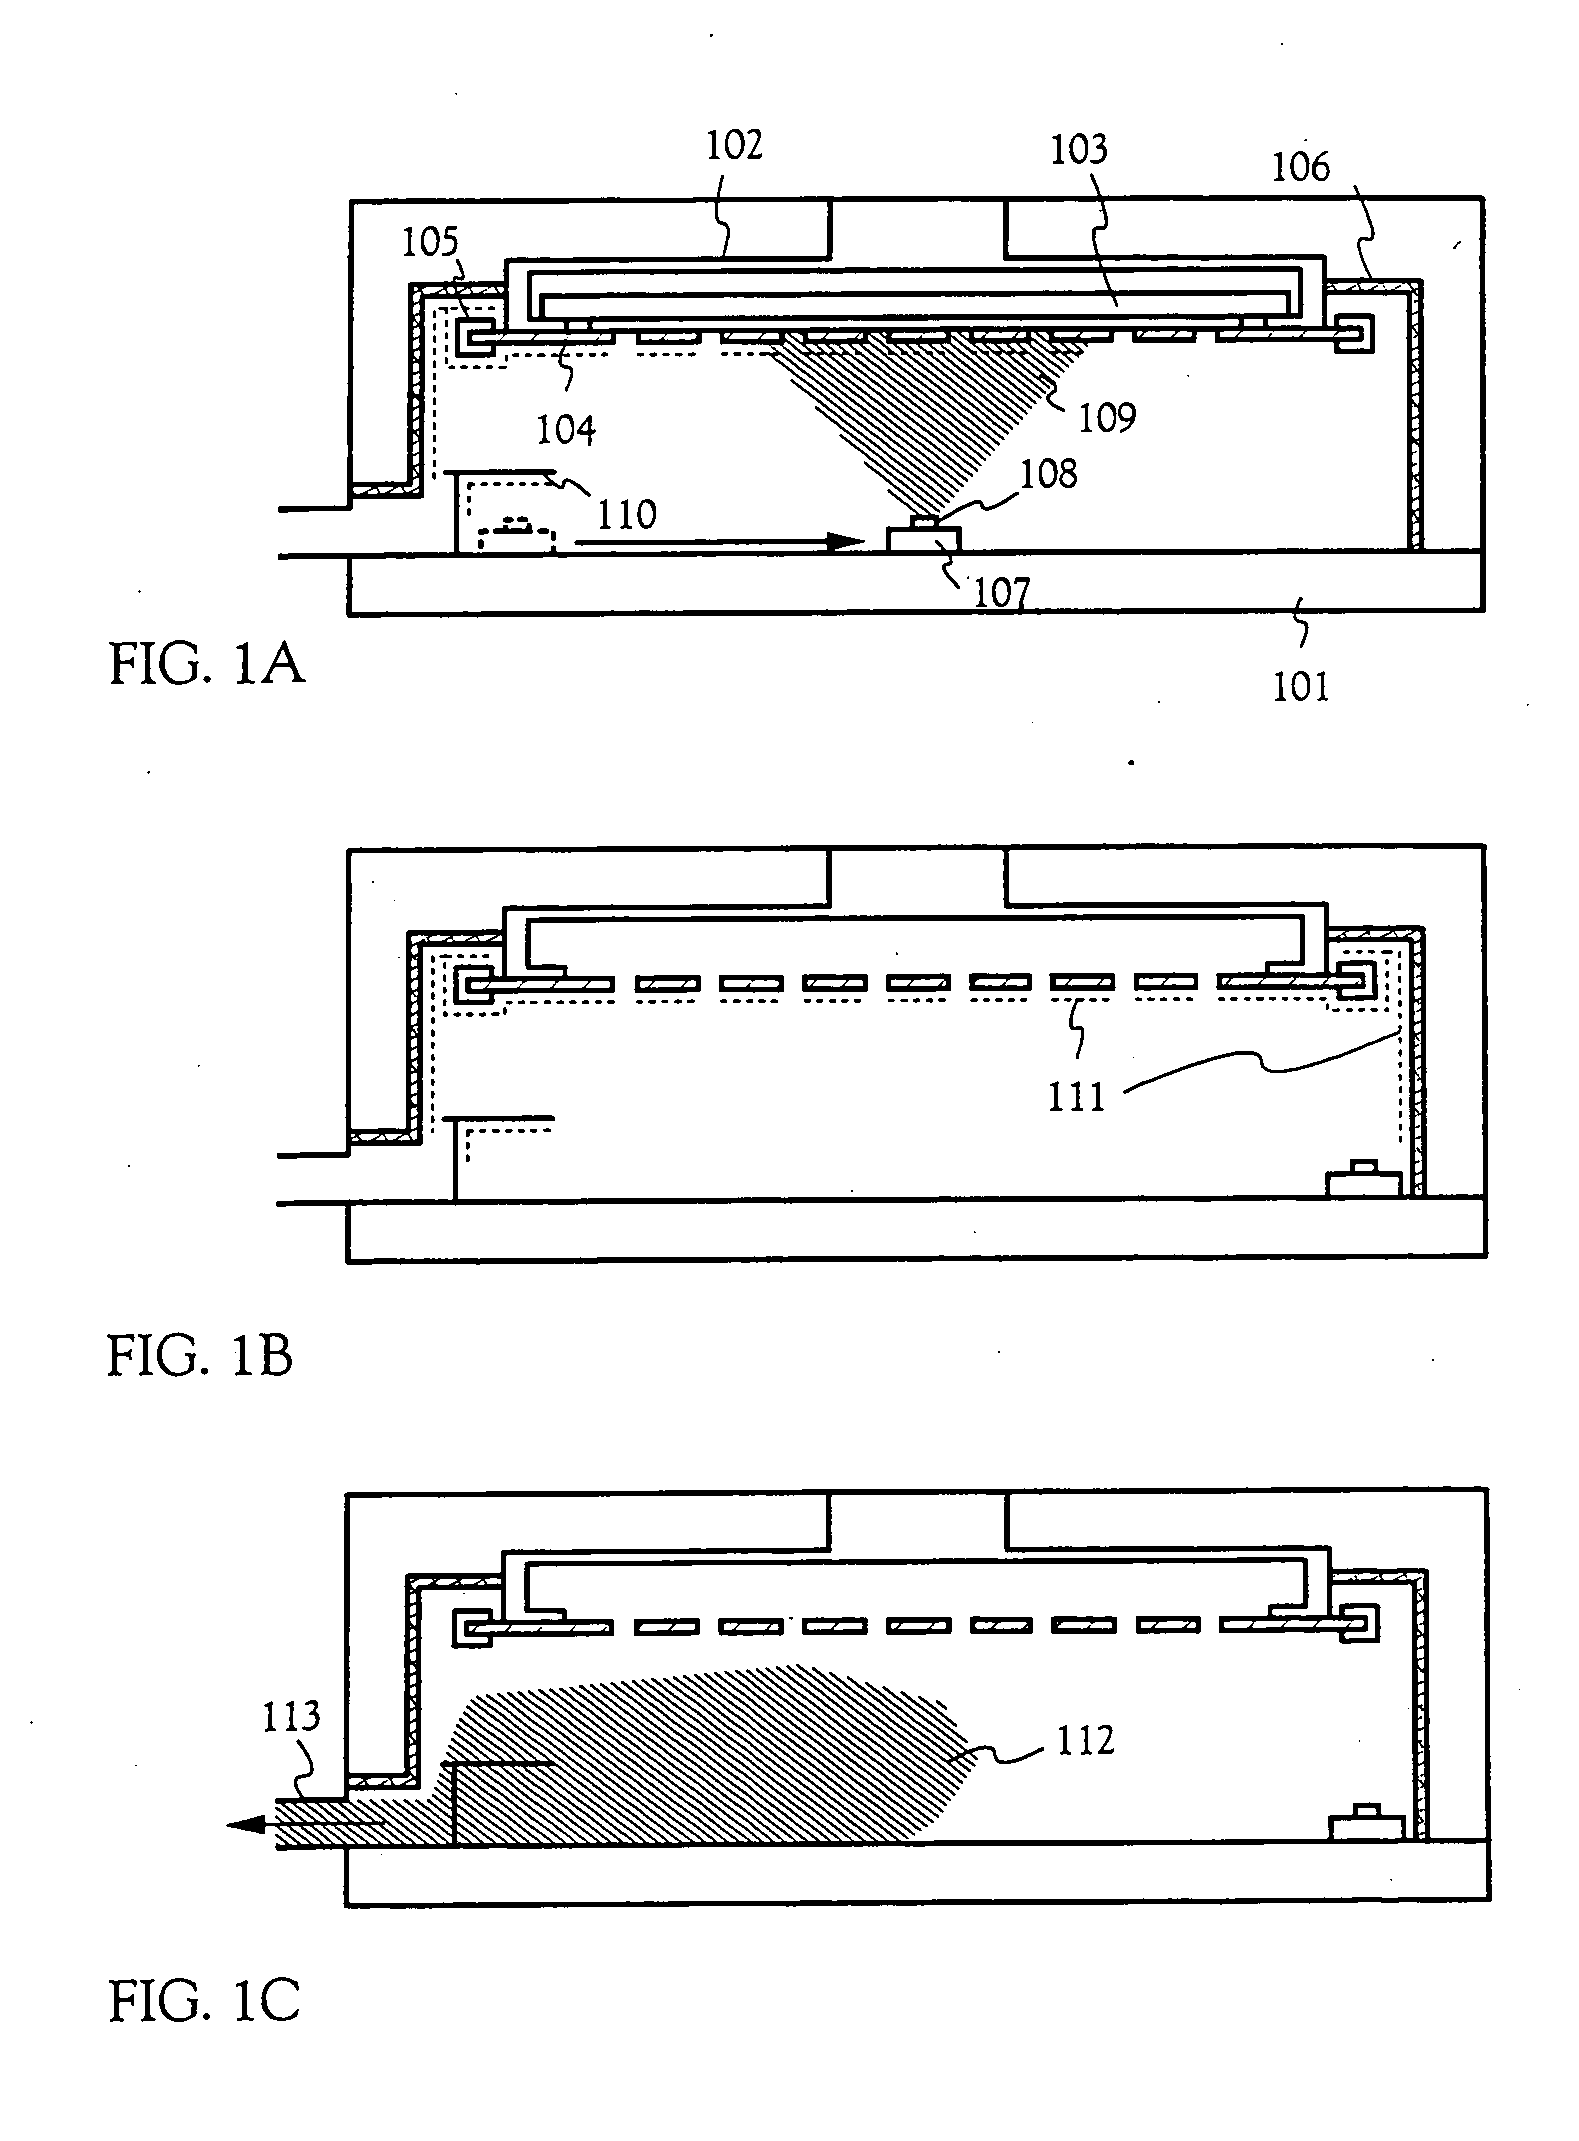 Film-forming apparatus, method of cleaning the same and method of manufacturing a light-emitting device